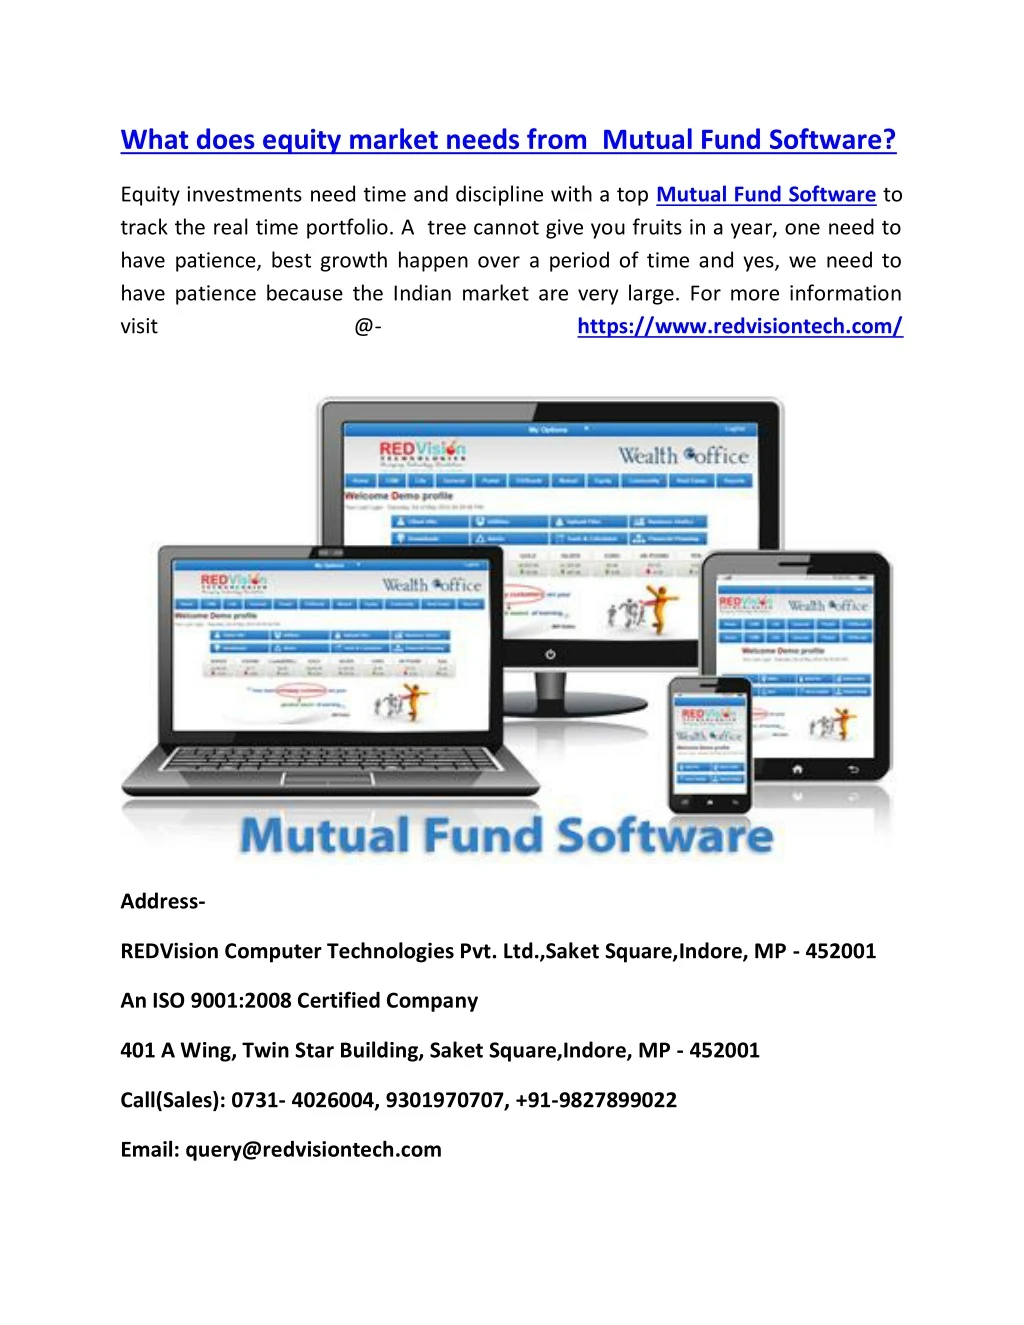 what does equity market needs from mutual fund